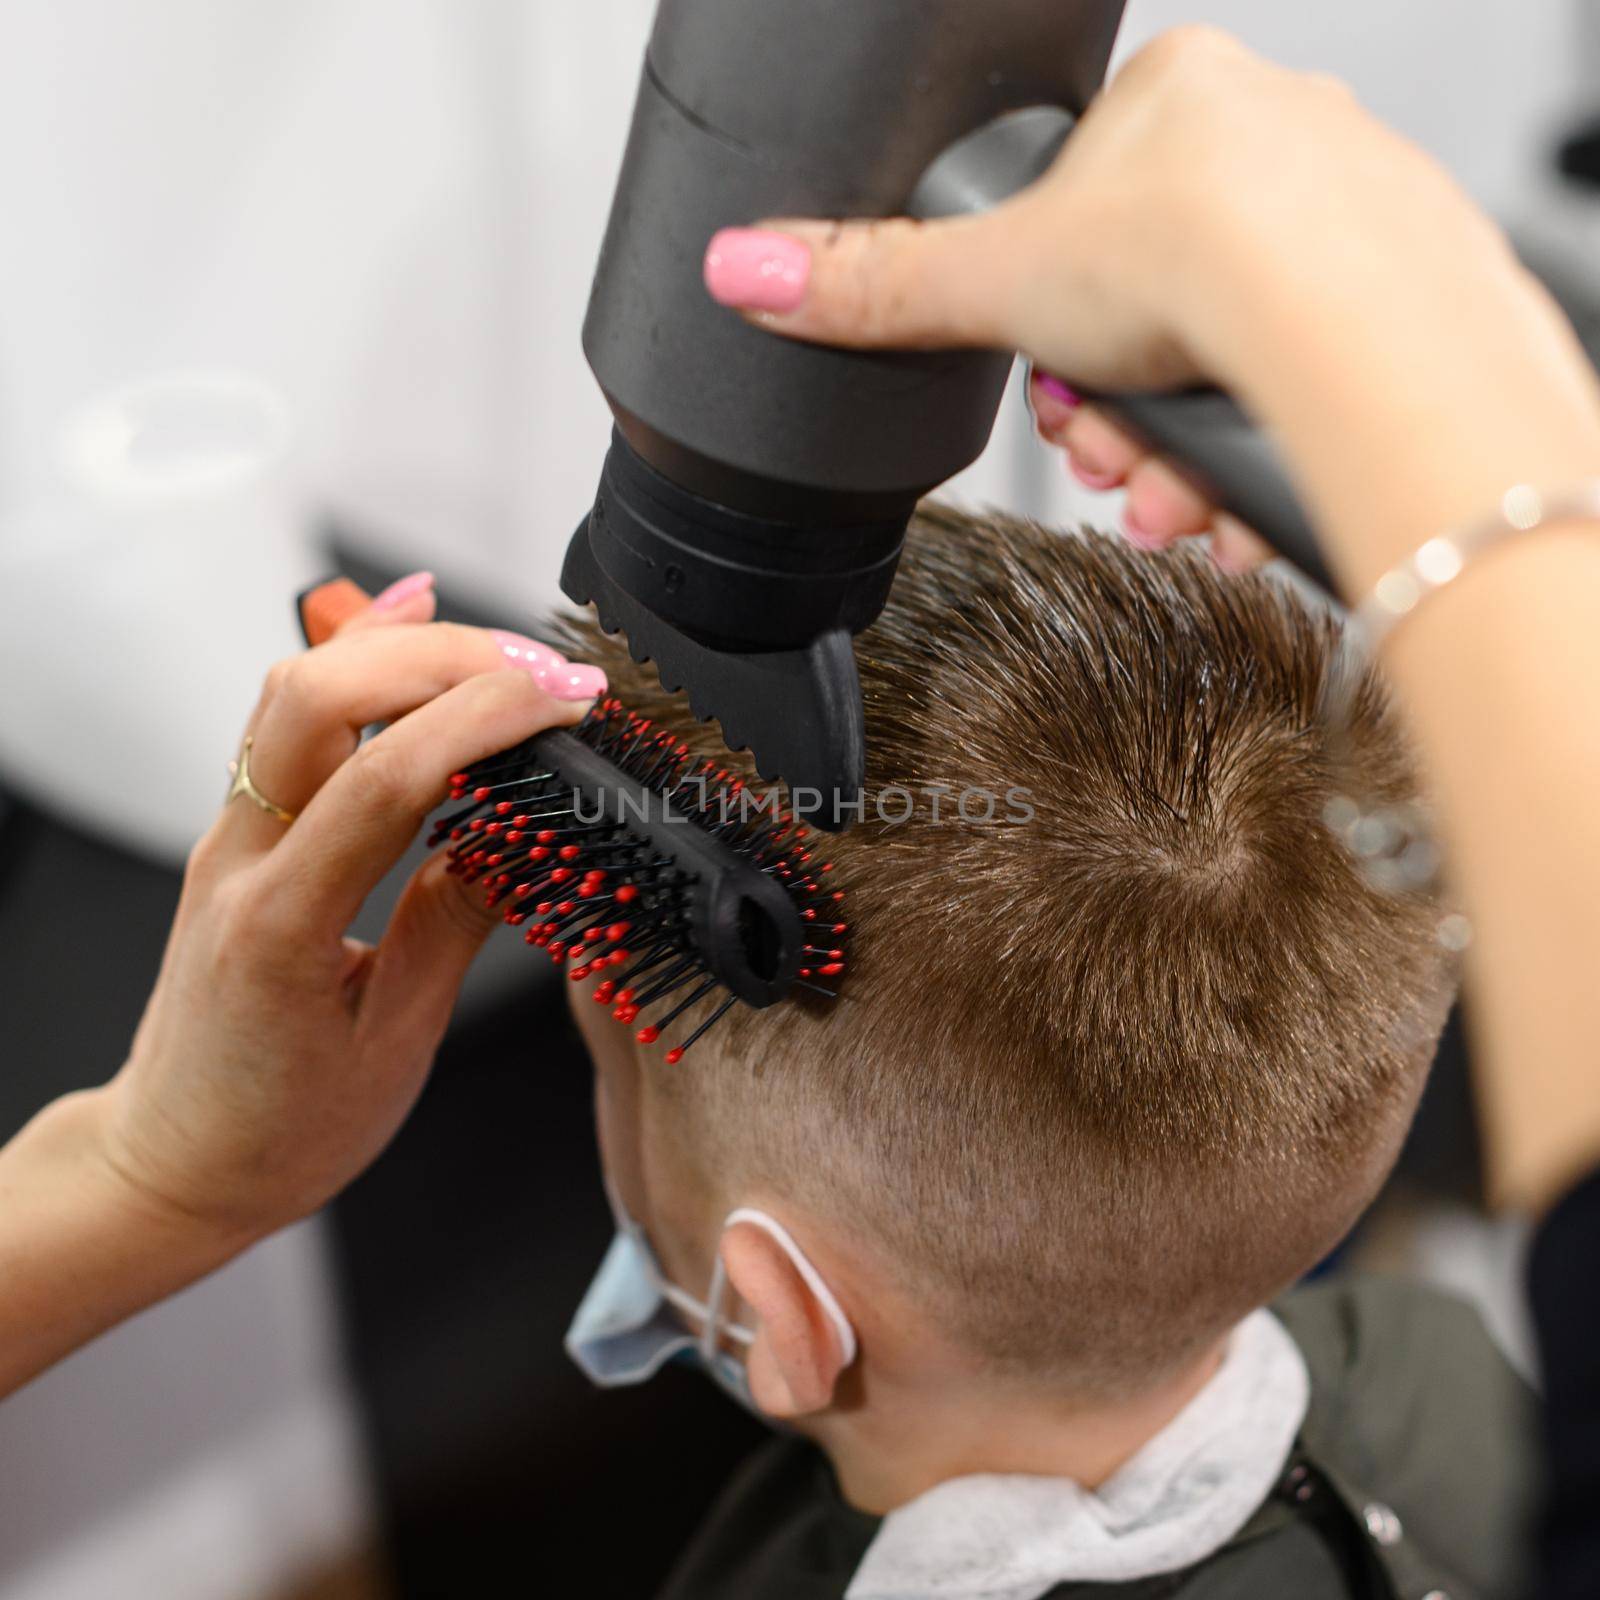 The hairdresser dries and styles the hair with the help of a hair dryer and a comb for a schoolboy boy, visiting the hairdresser during a coronavirus pandemic. by Niko_Cingaryuk